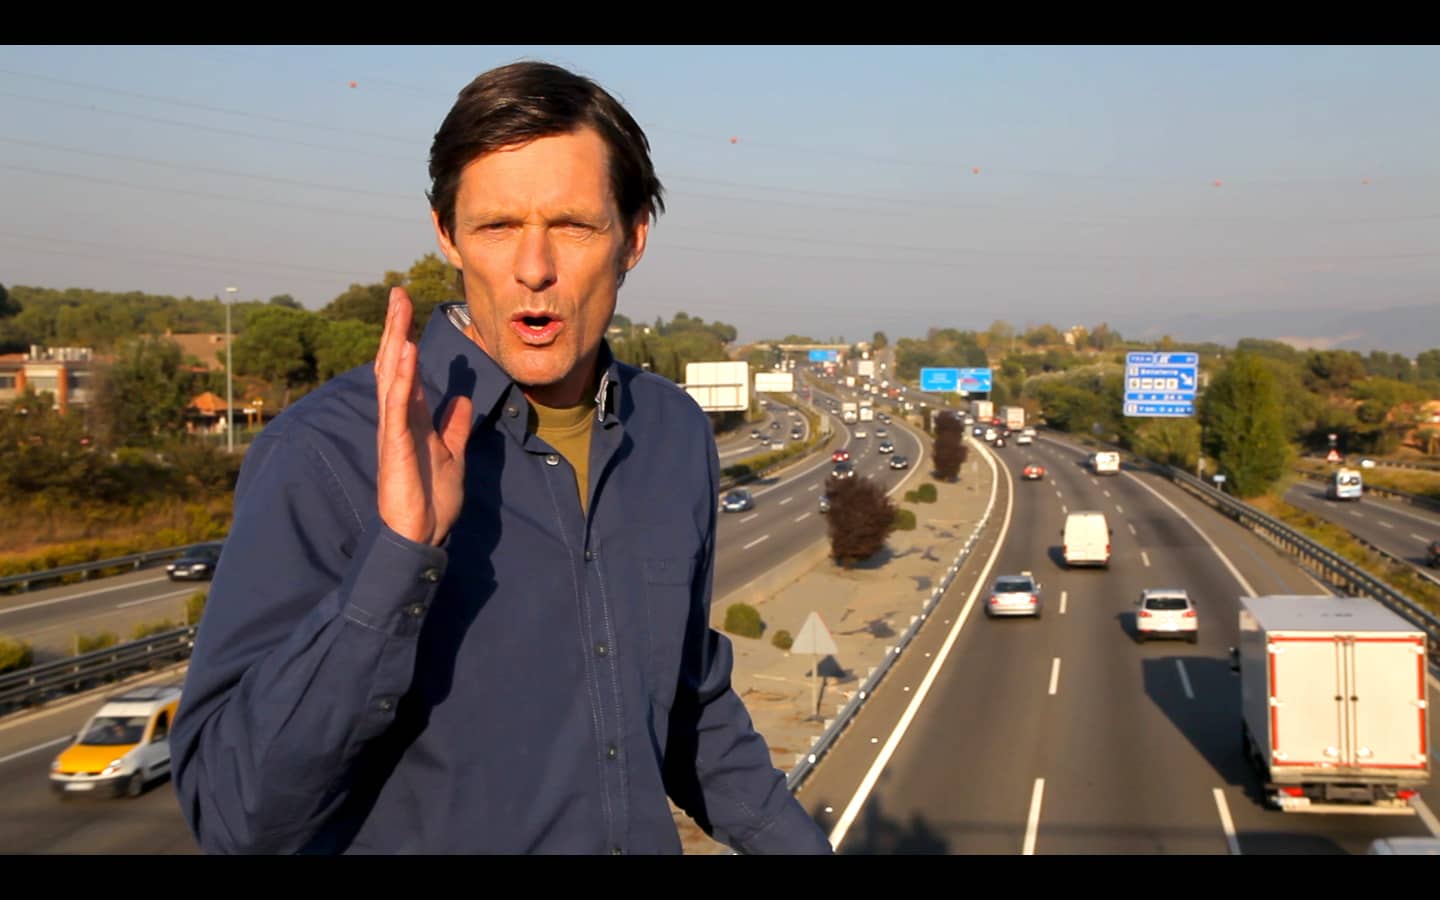 man talking to the camera above the highway, from a video advertisement